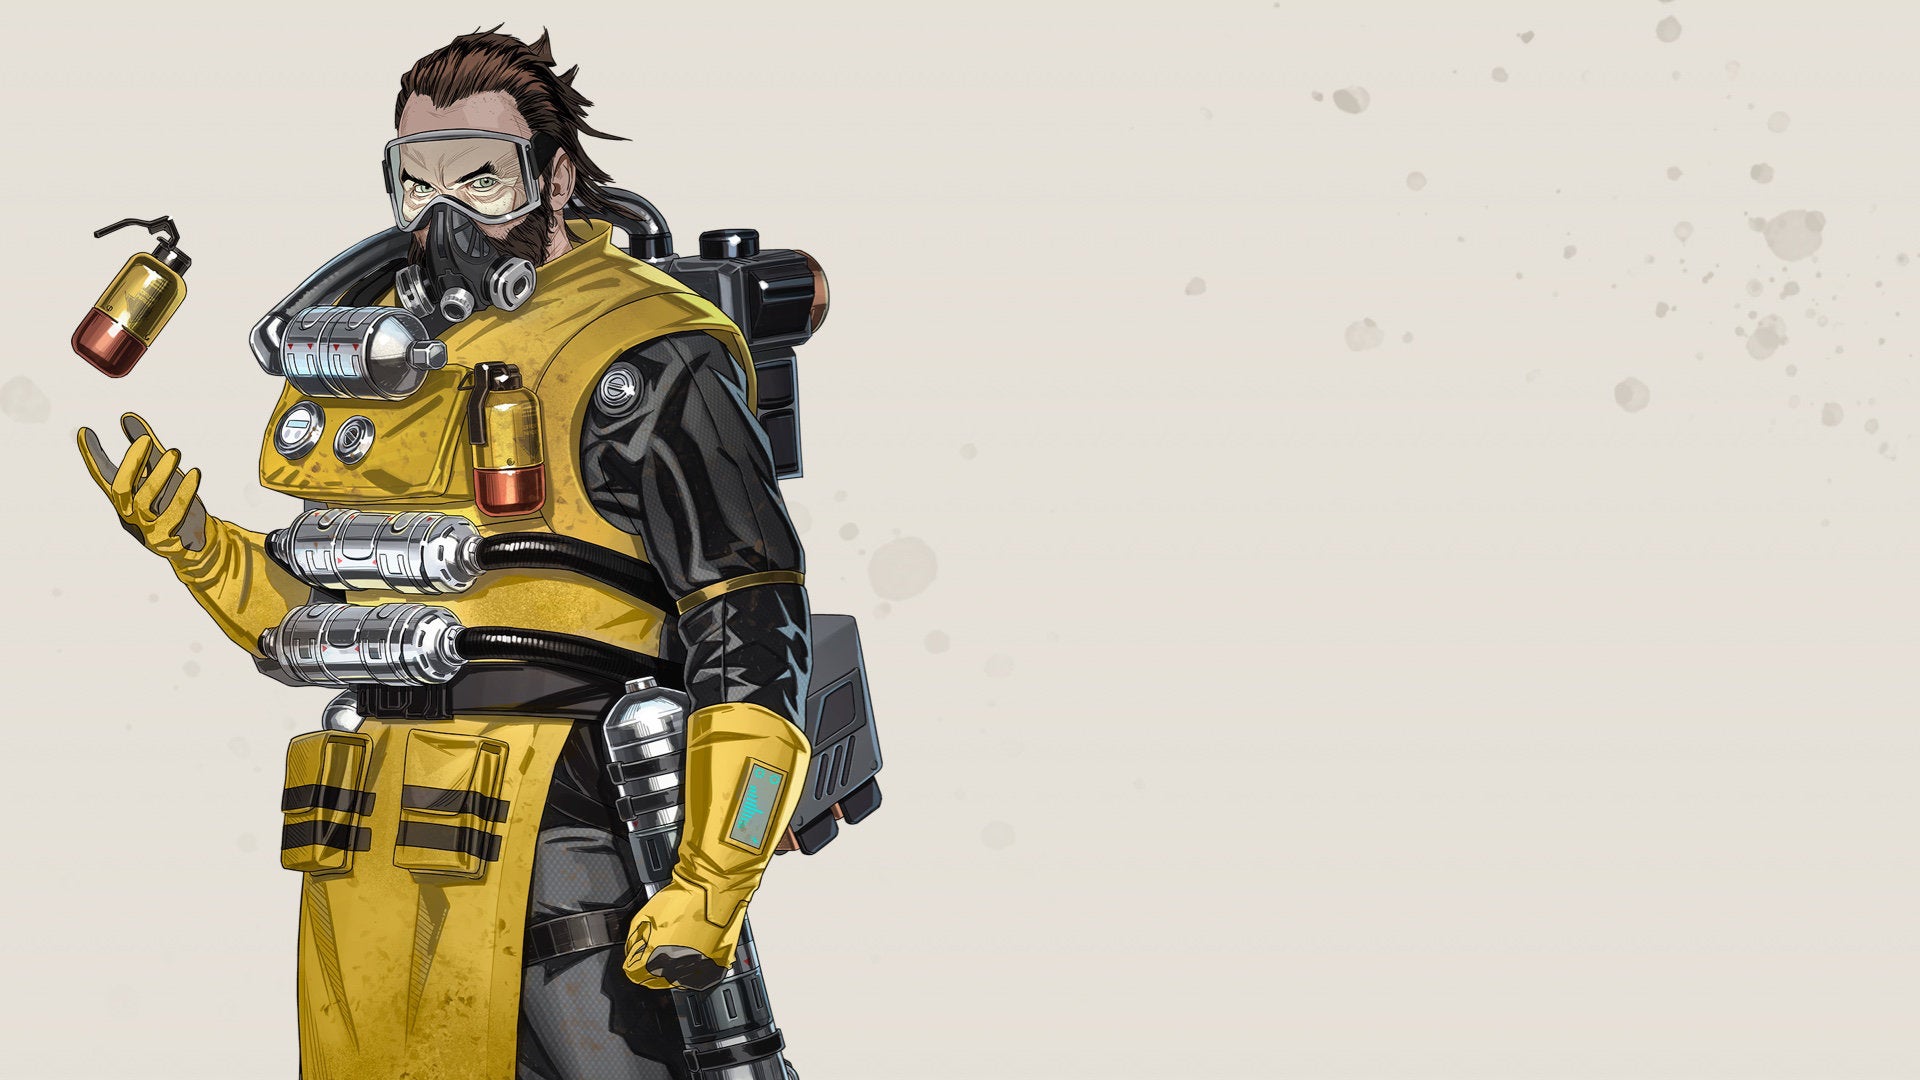 Official art of Caustic, one of the Apex Legends characters.